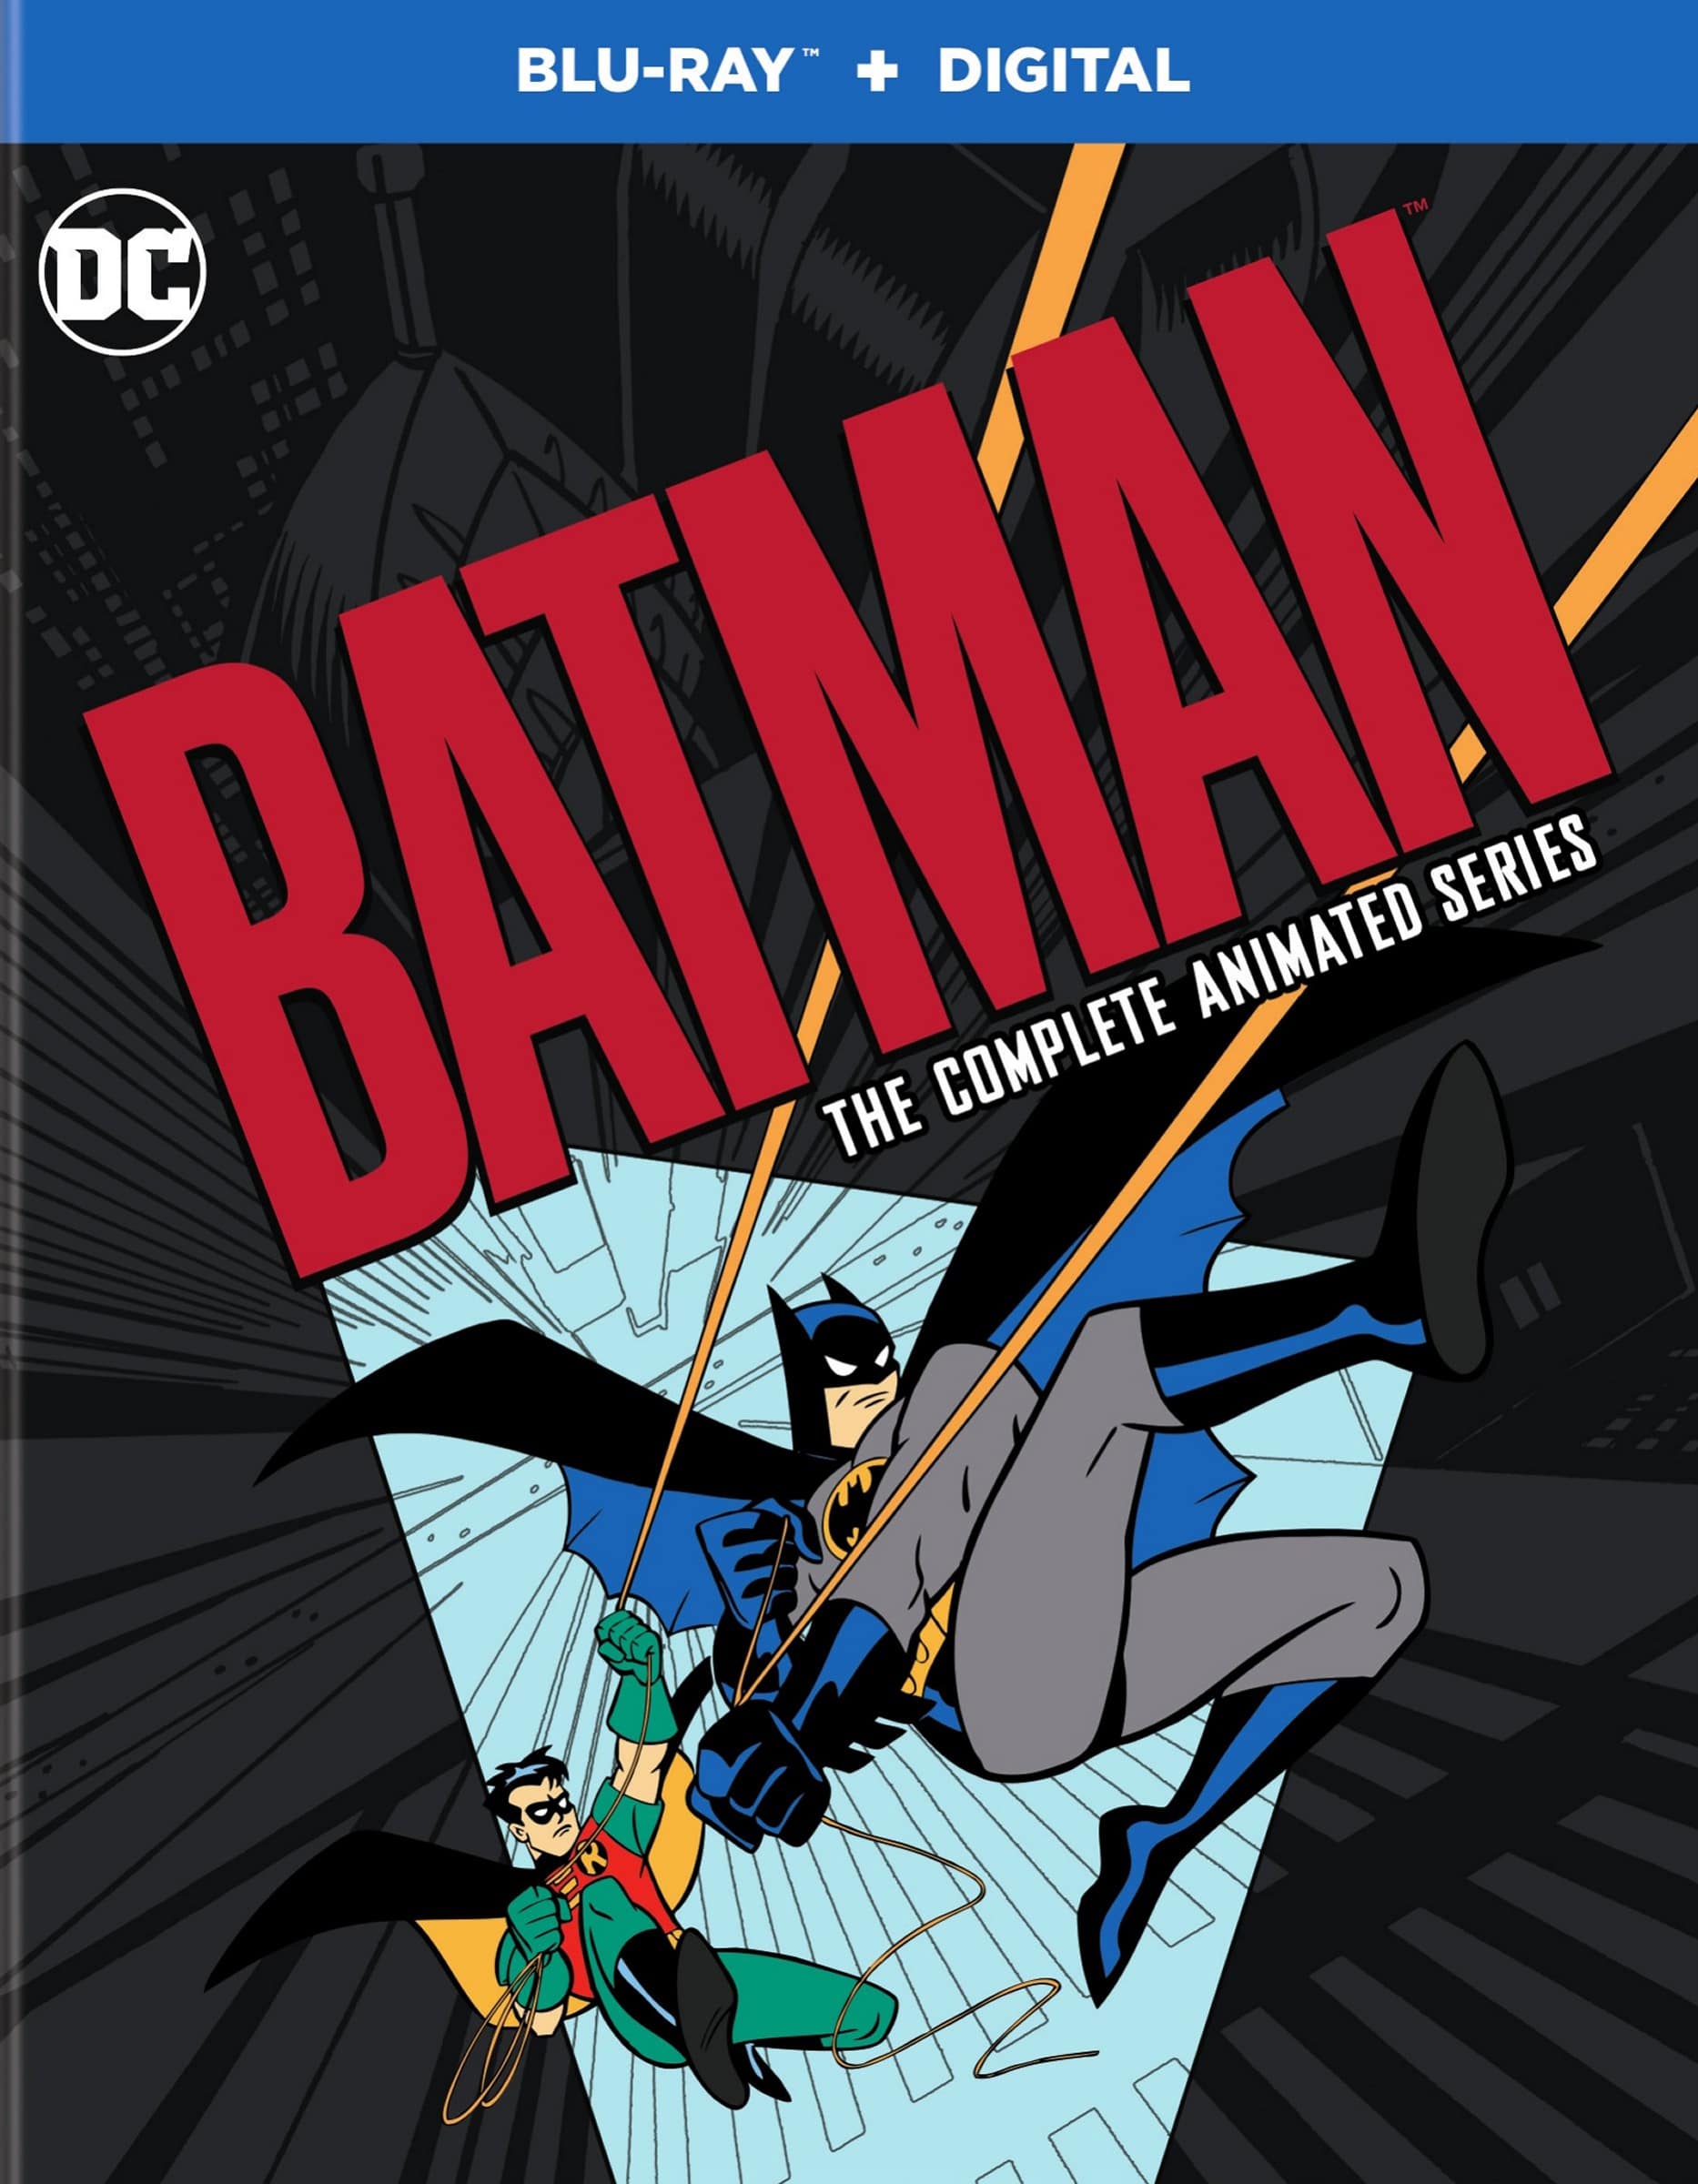 A Fan-Made Coffee Table Book about Batman: The Animated Series !!